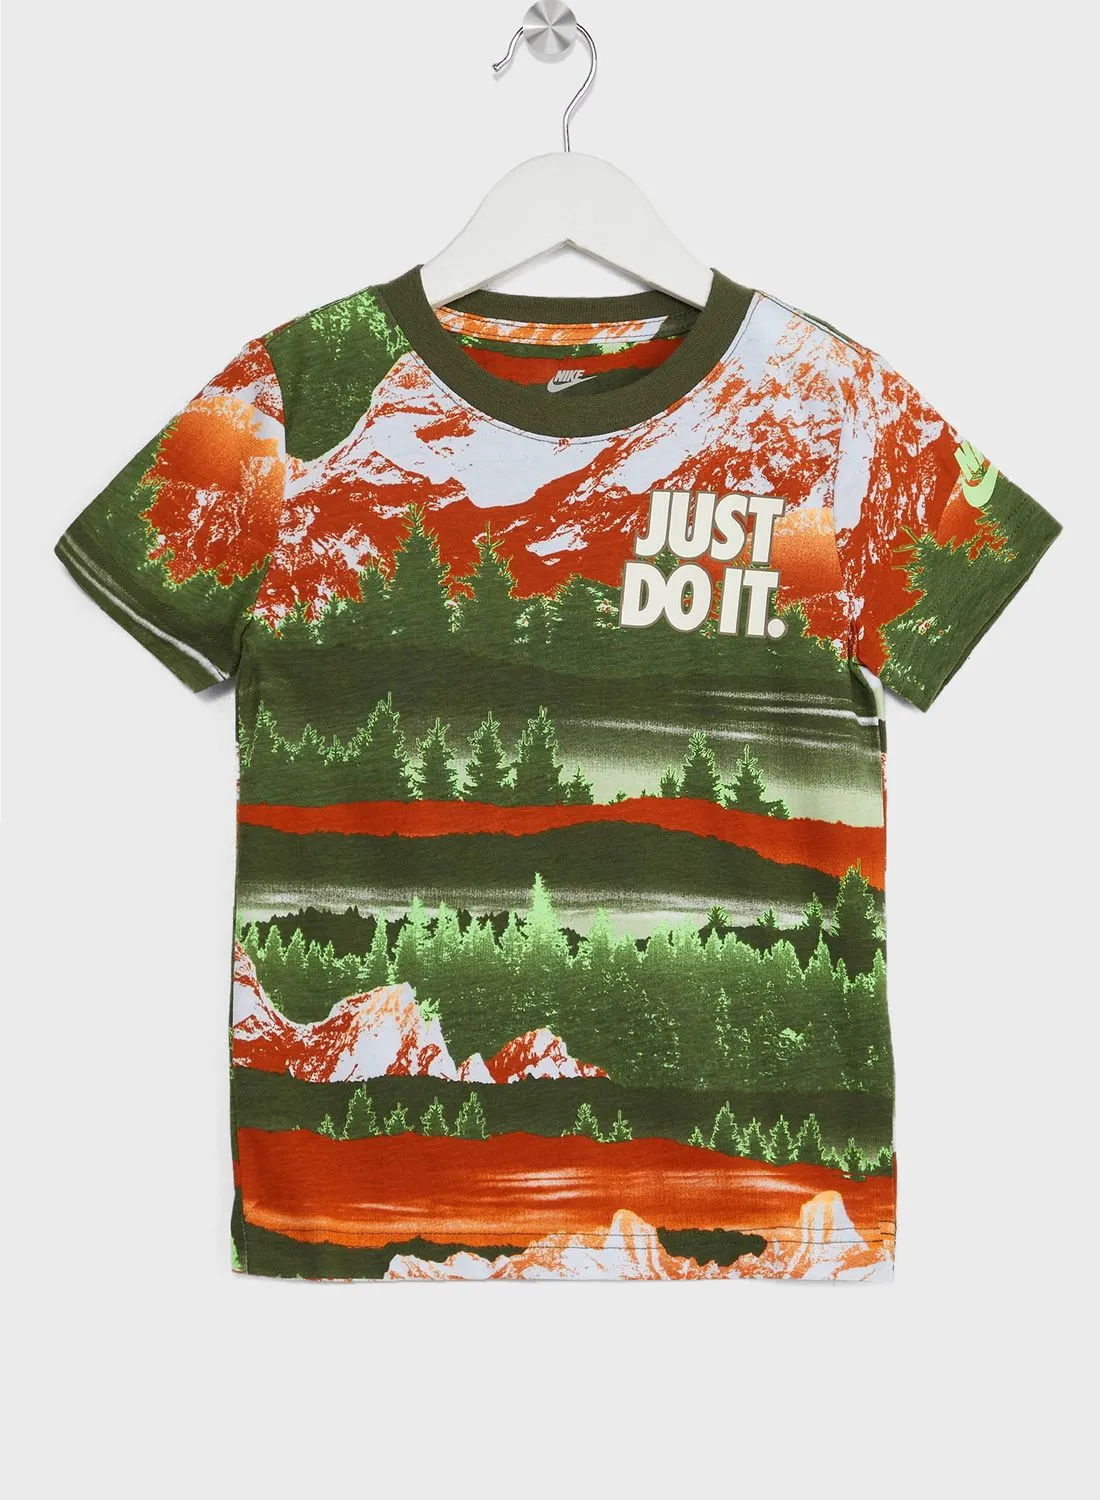 Nike Snowscape All Over Printed T-Shirt